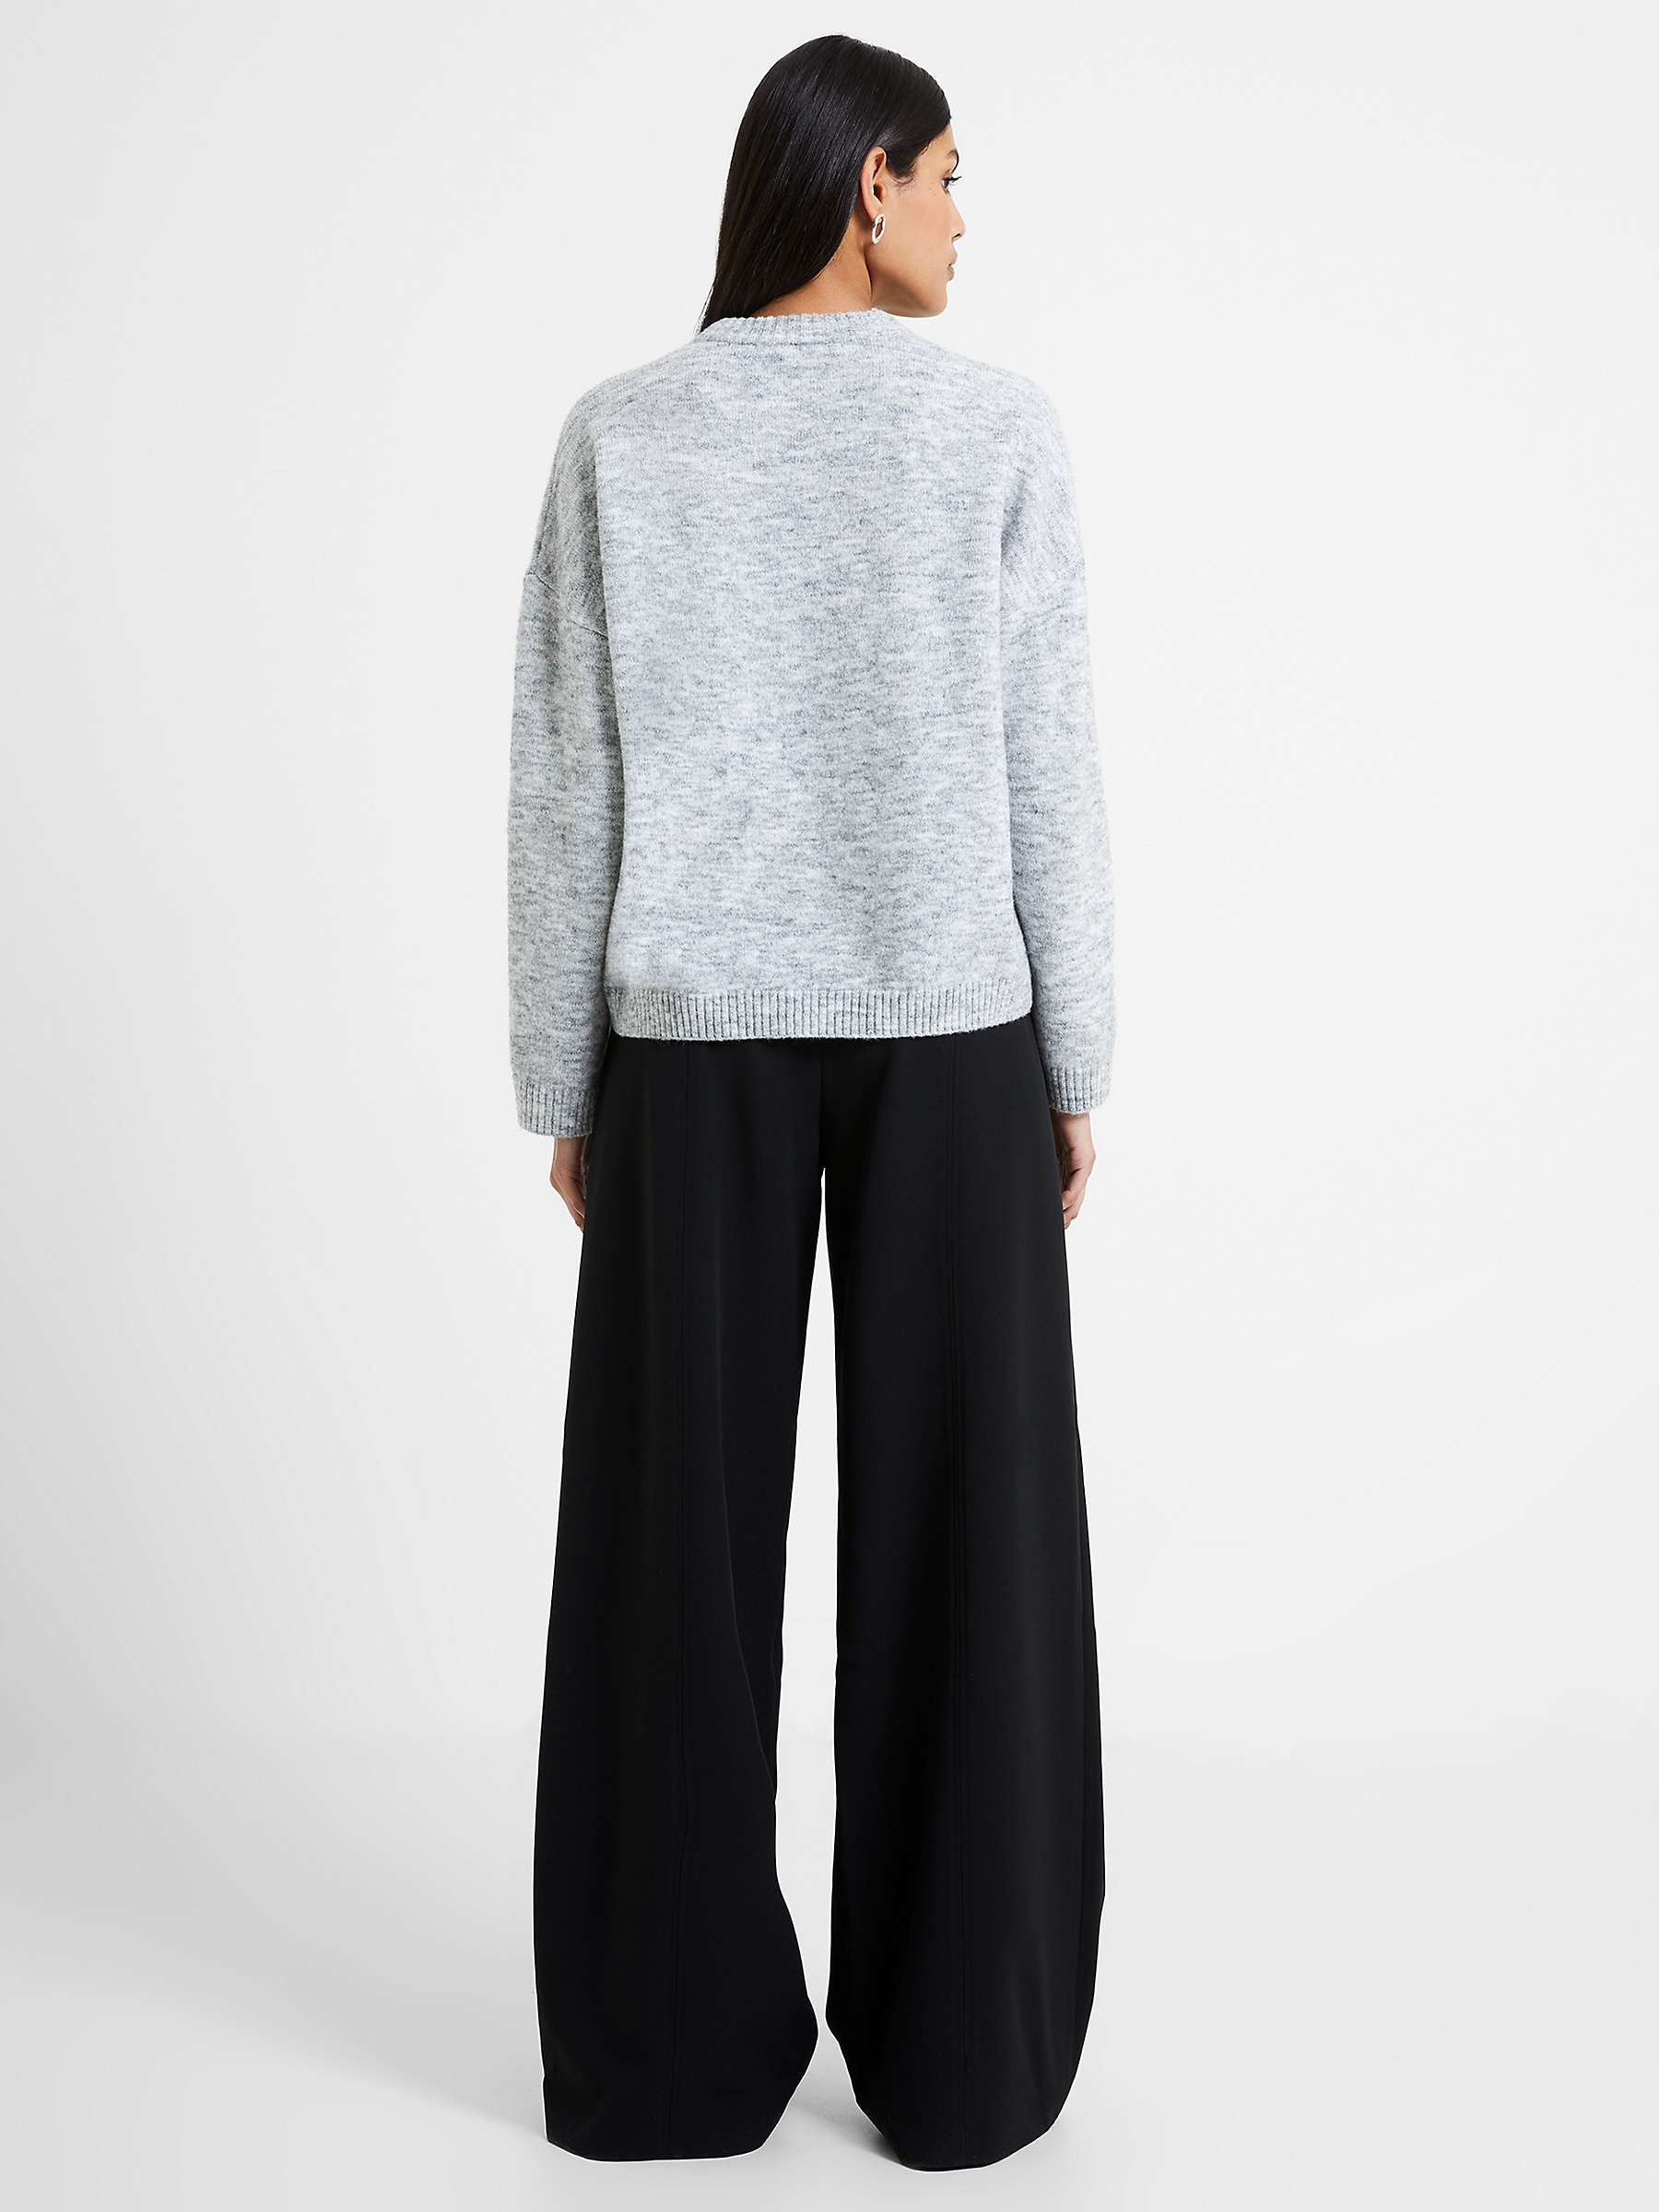 Buy French Connection Kezia Jumper, Light Grey Online at johnlewis.com